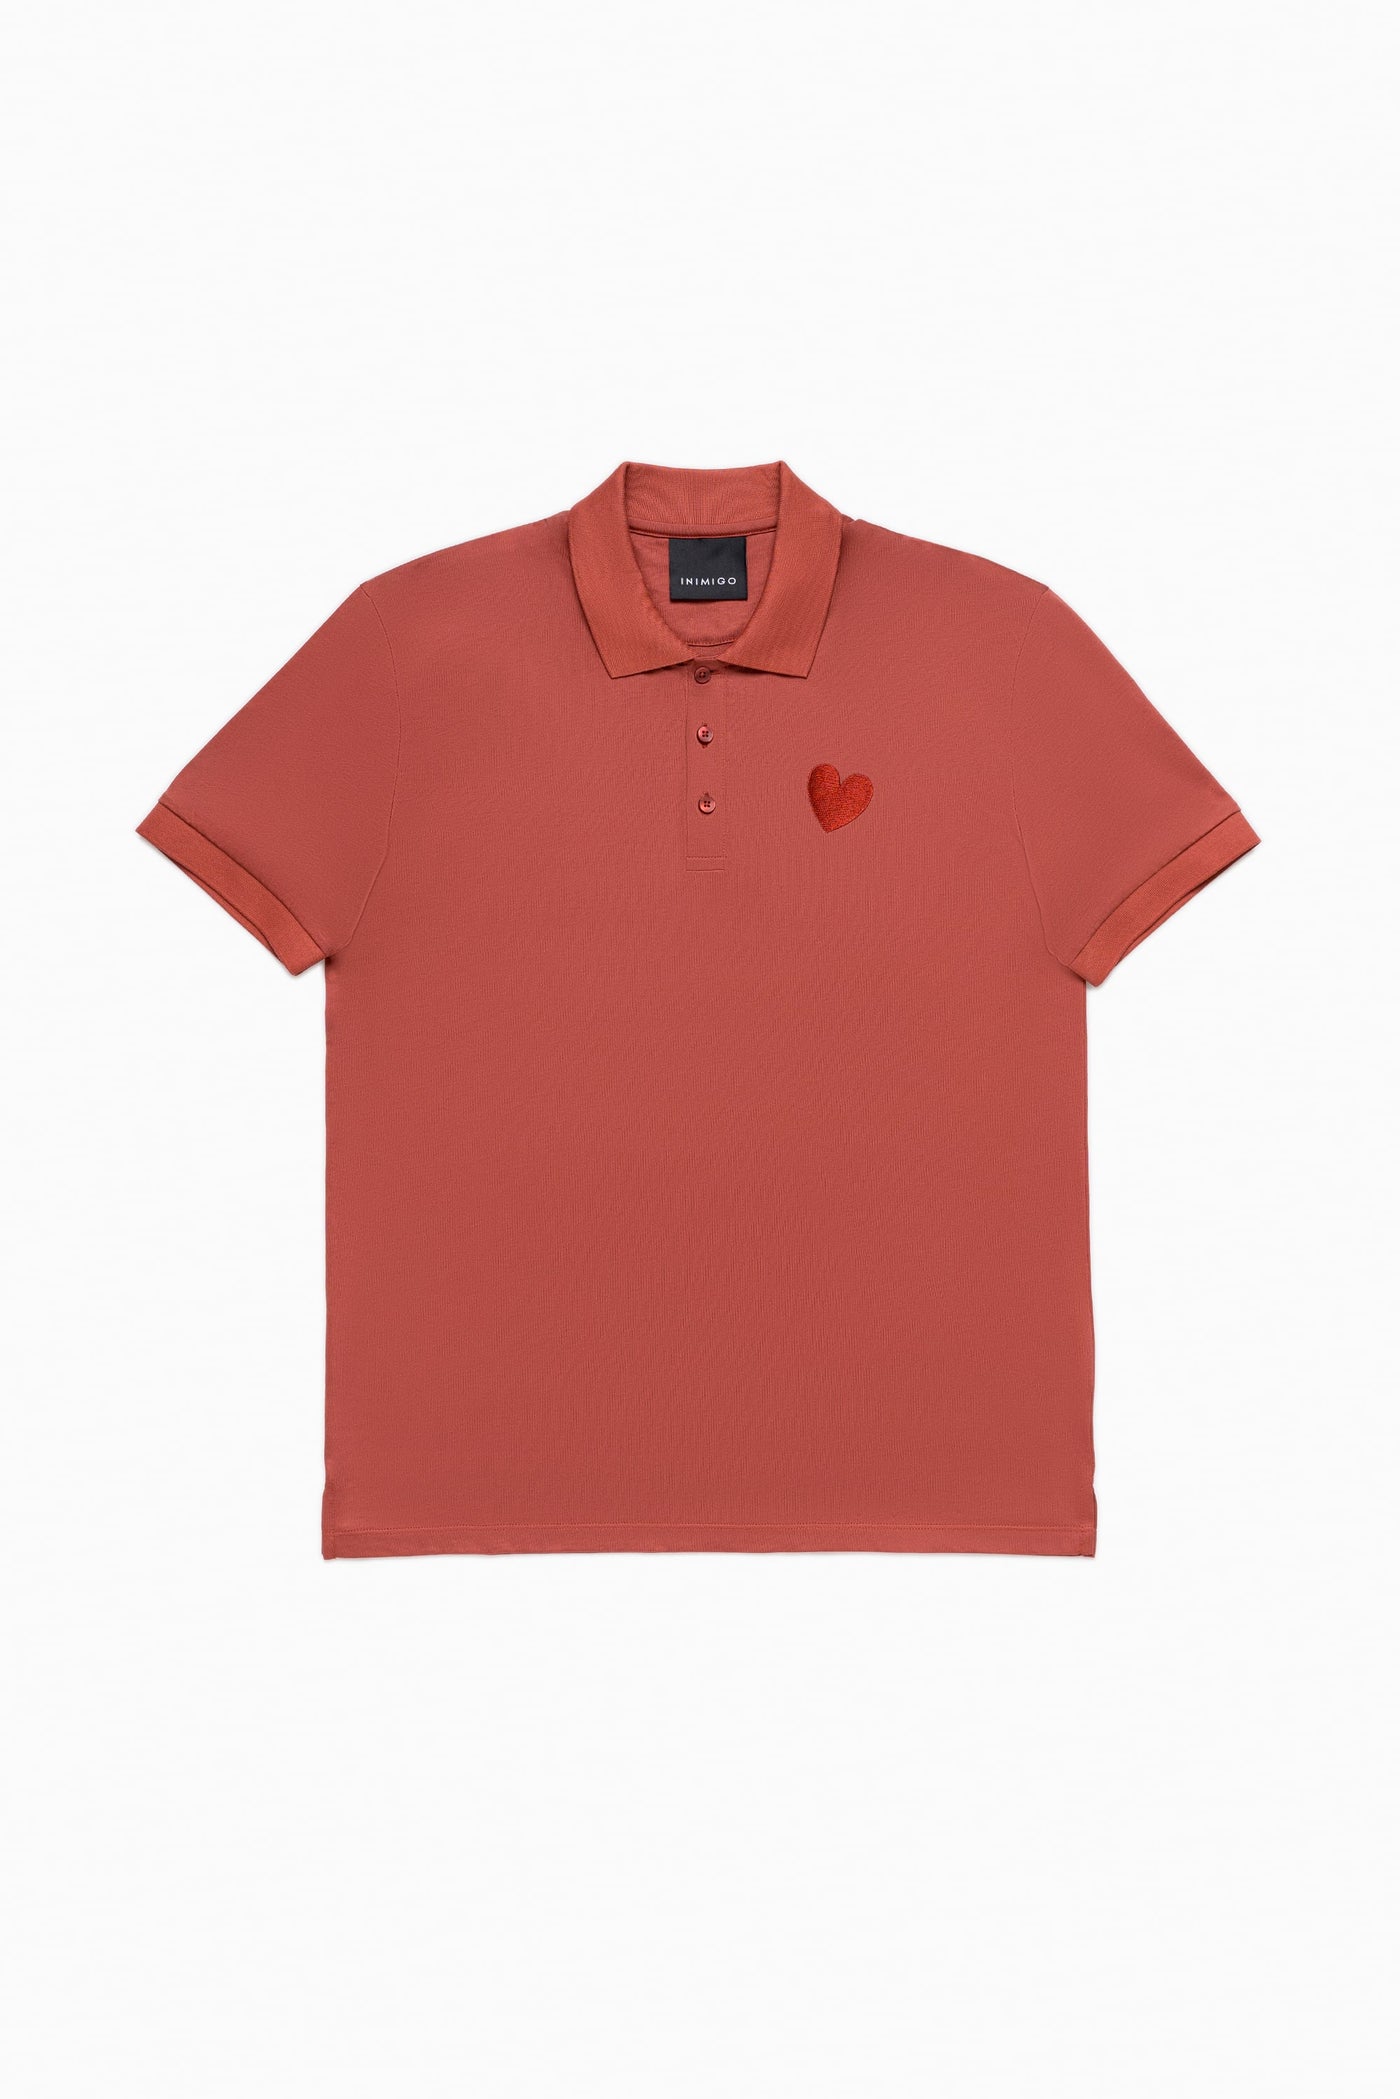 Classic Embroidery Heart Jersey Red Ochre Polo